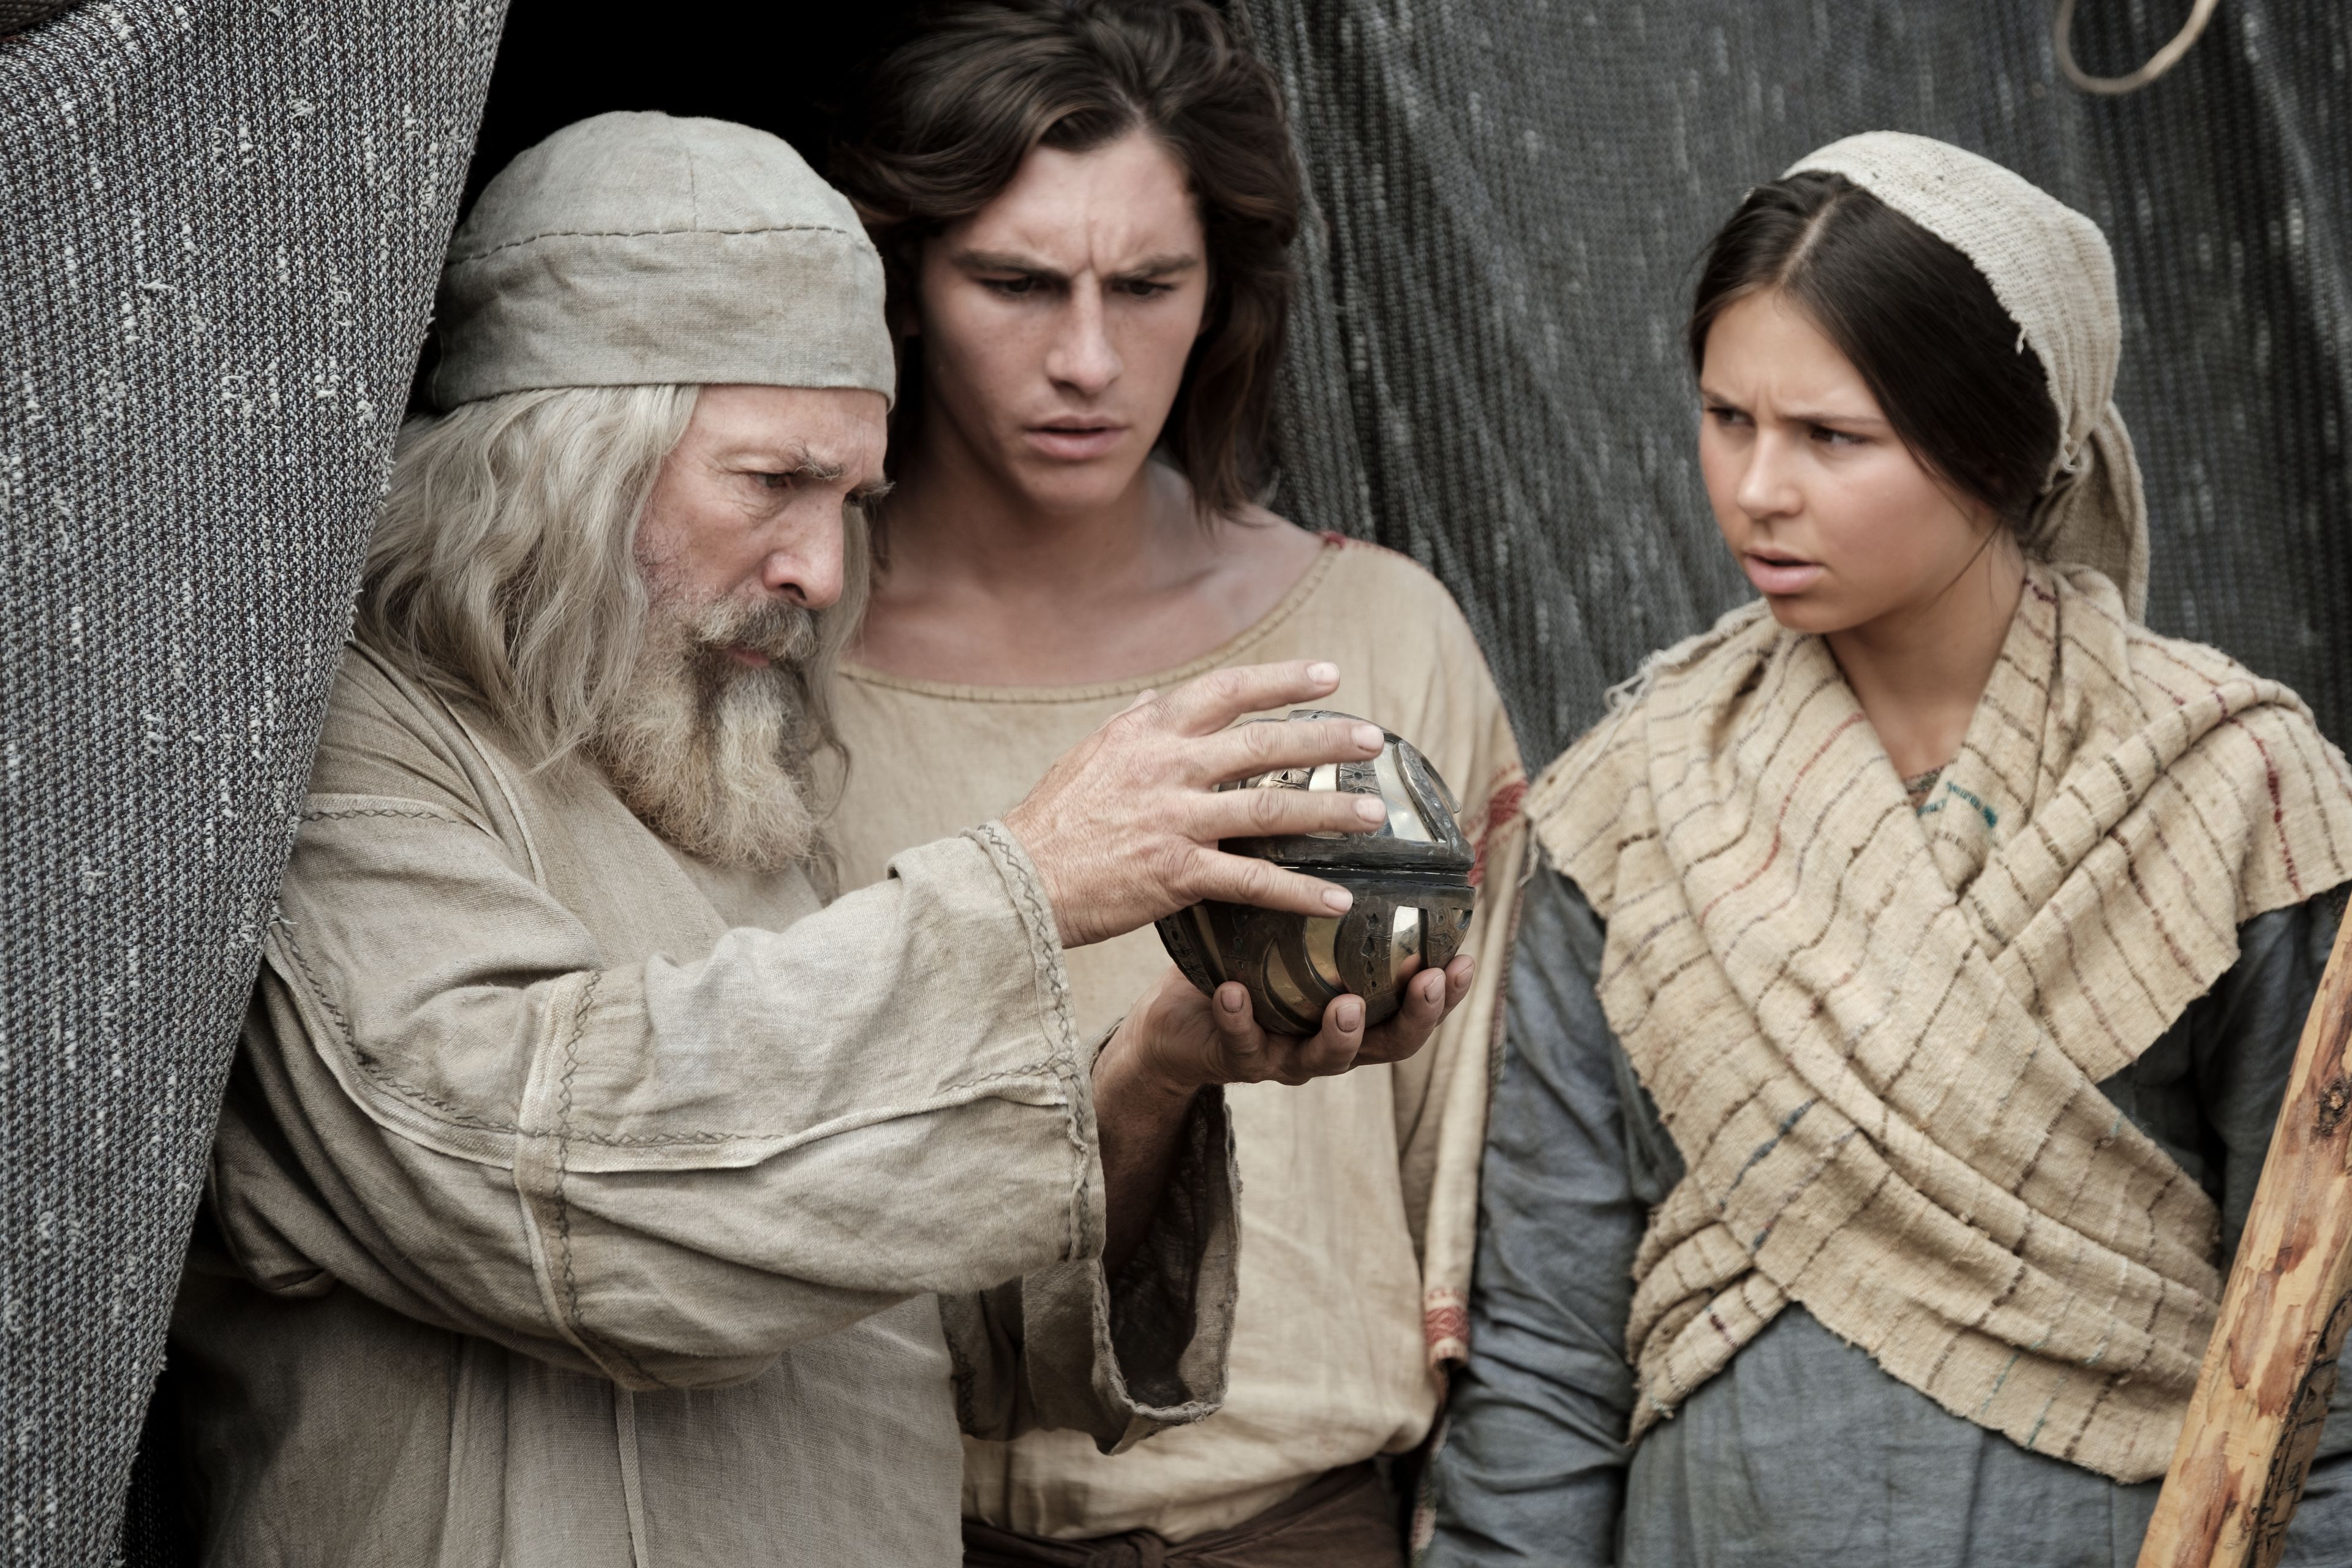 Lehi shows the Liahona to Nephi and his wife.